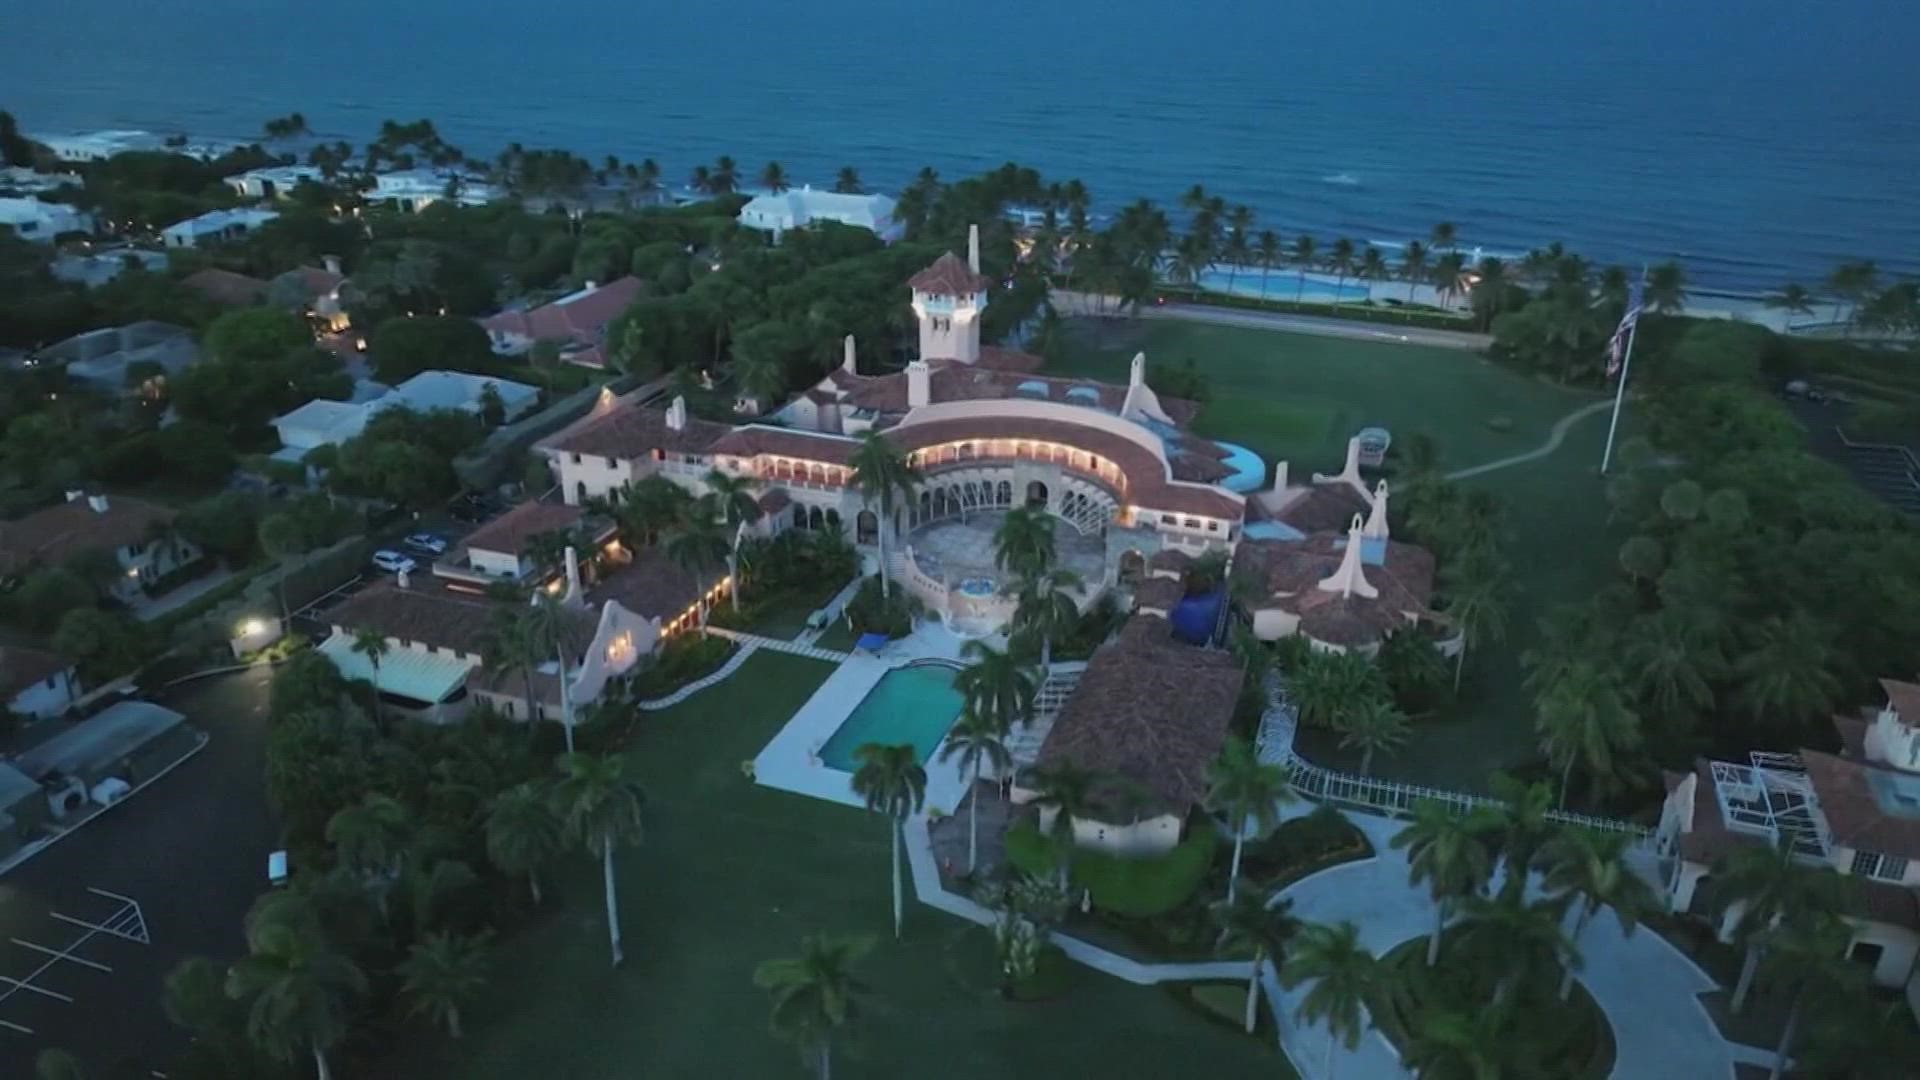 In a court filing Tuesday night, the Justice Department said “government records were likely concealed and removed” from a storage room at Mar-a-Lago.